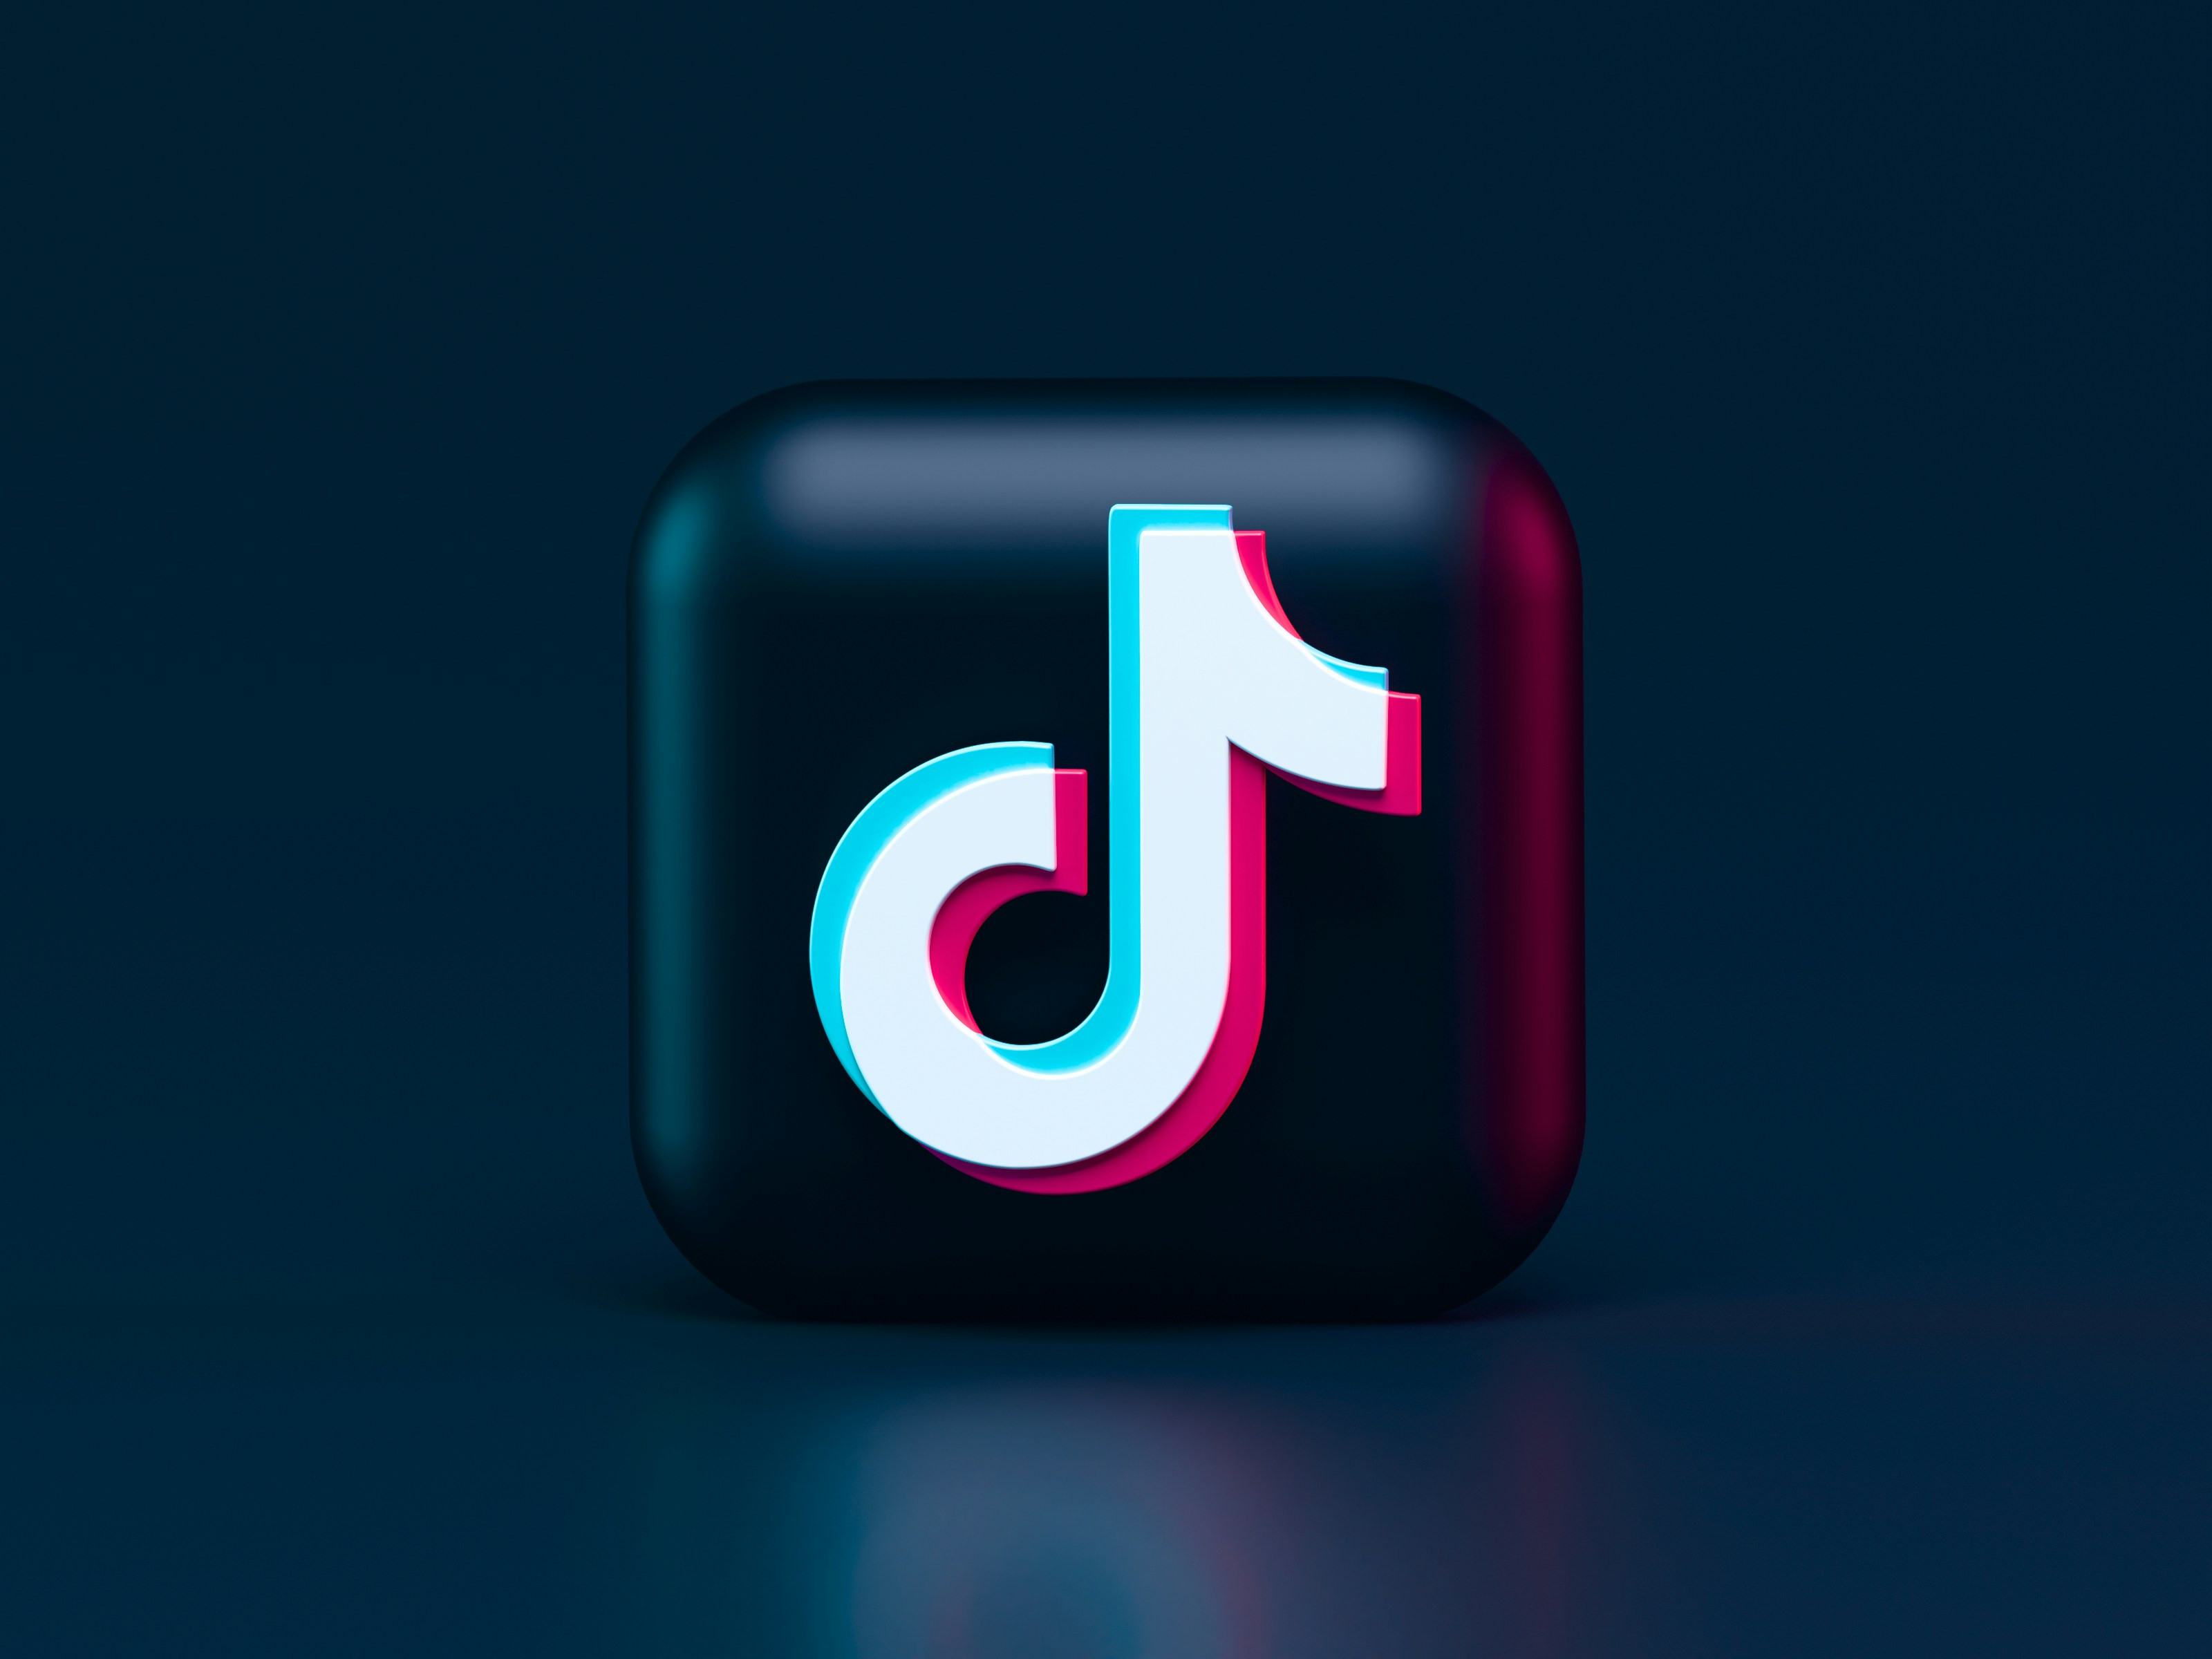 Social Search: How TikTok Has Become a Powerful Search Engine